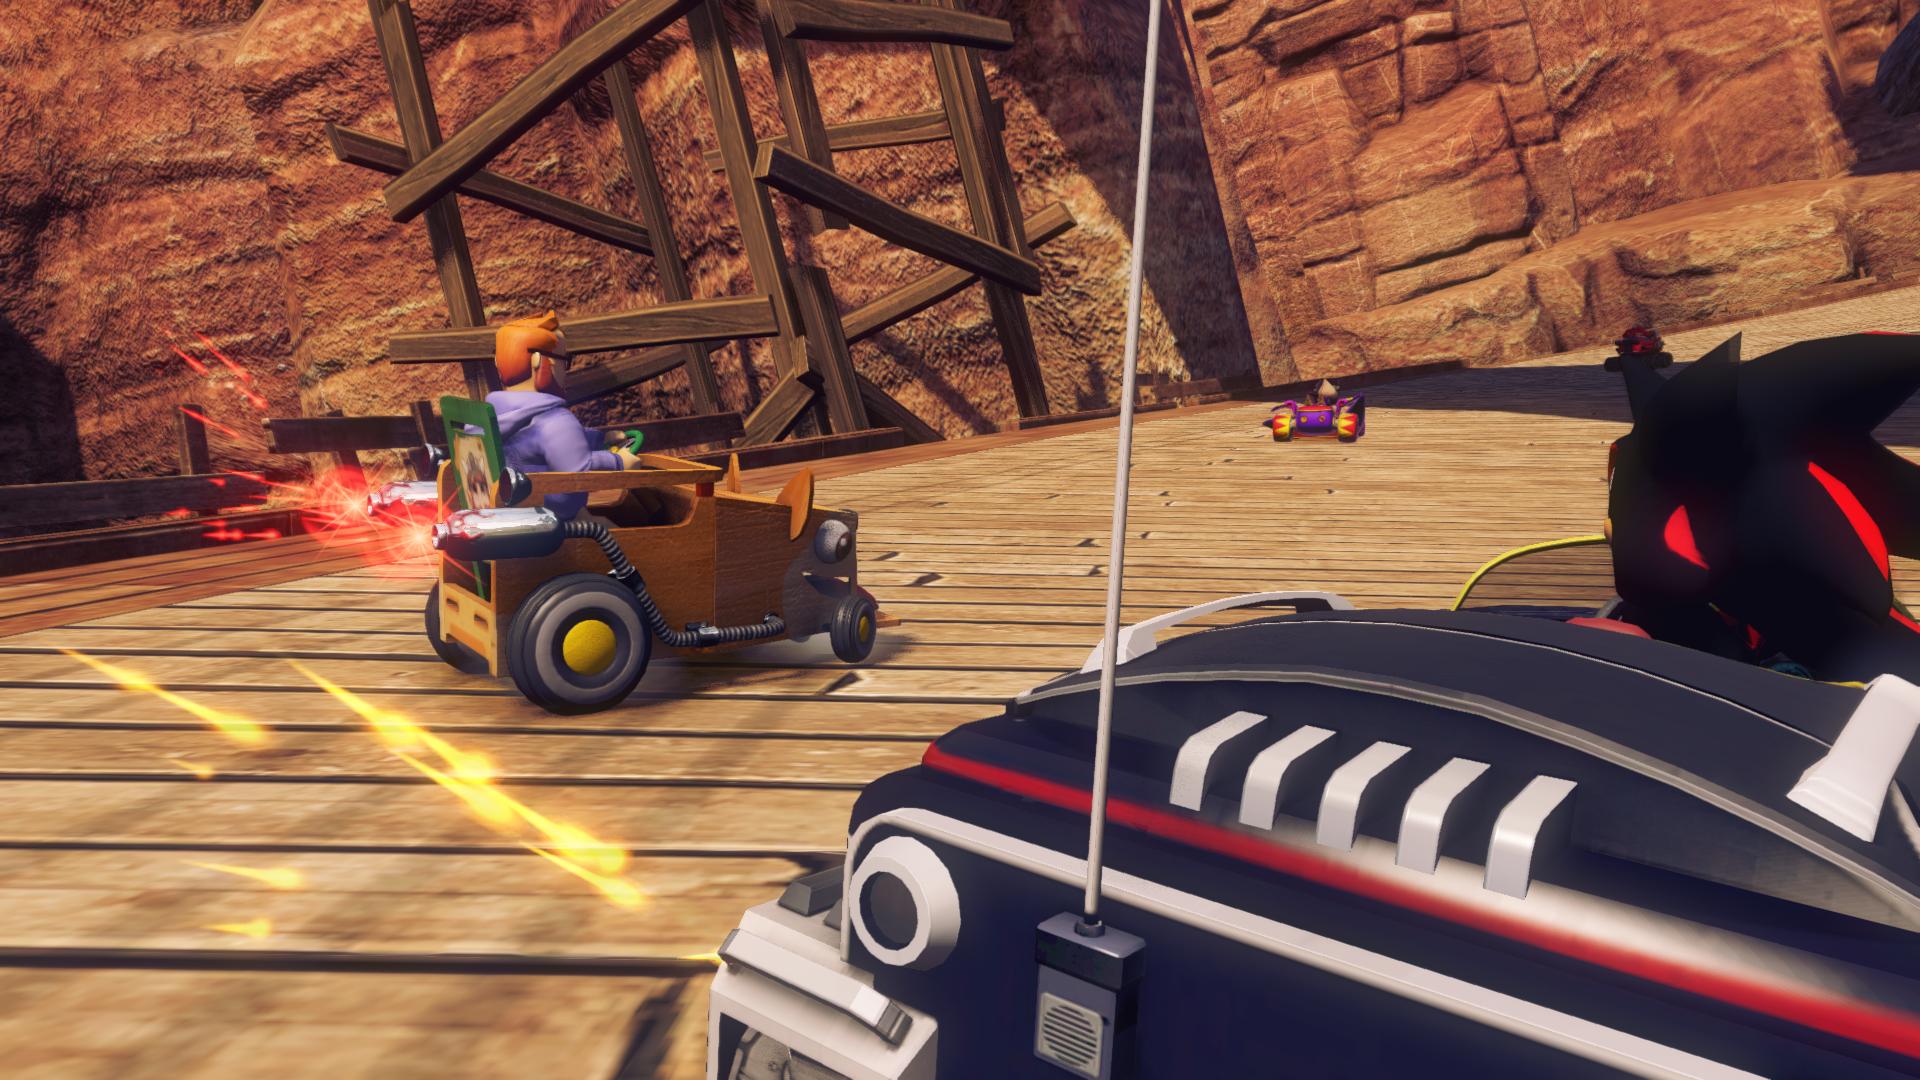 Sonic and All-Stars Racing Transformed - Yogscast DLC Steam Gift 51.92 $